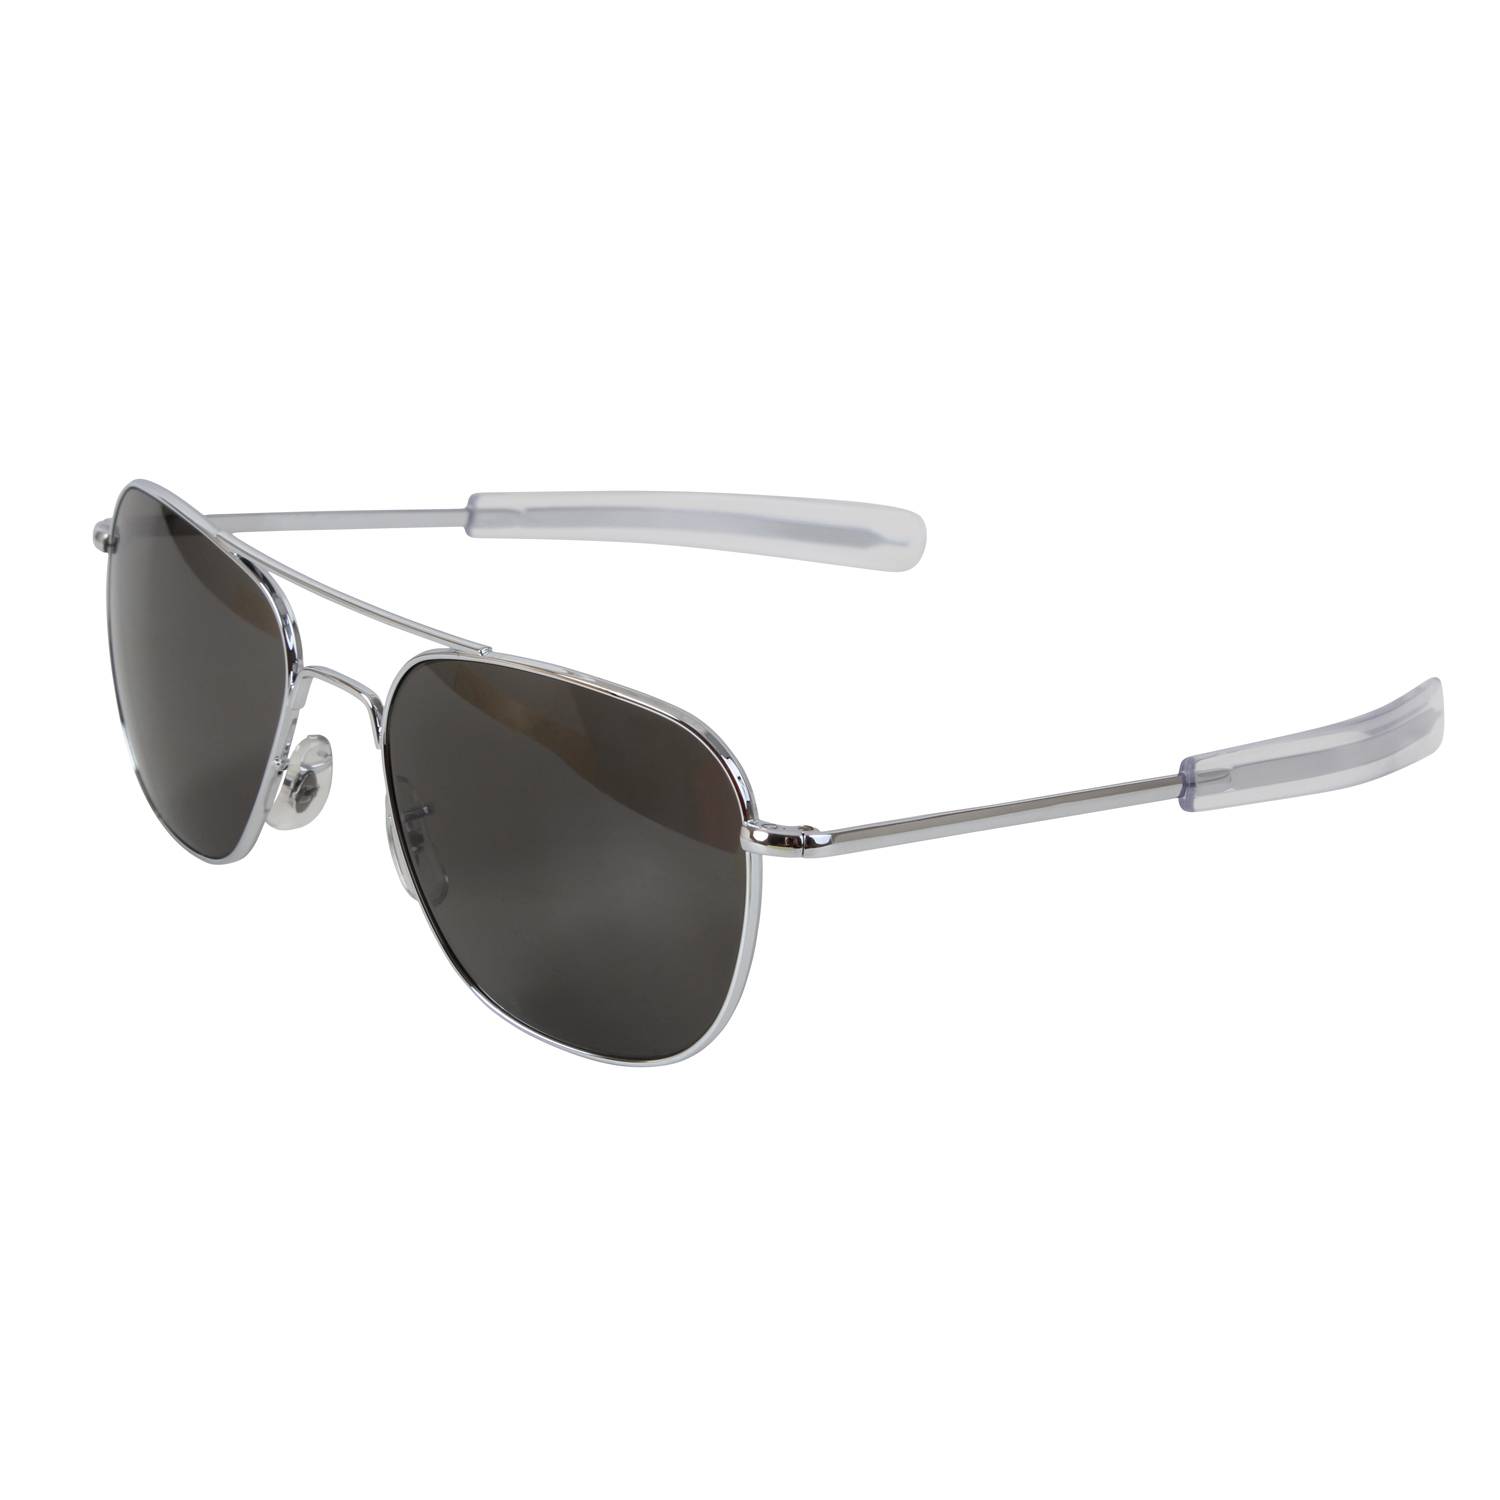 GENUINE GOVERNMENT AIR FORCE PILOTS SUNGLASSES